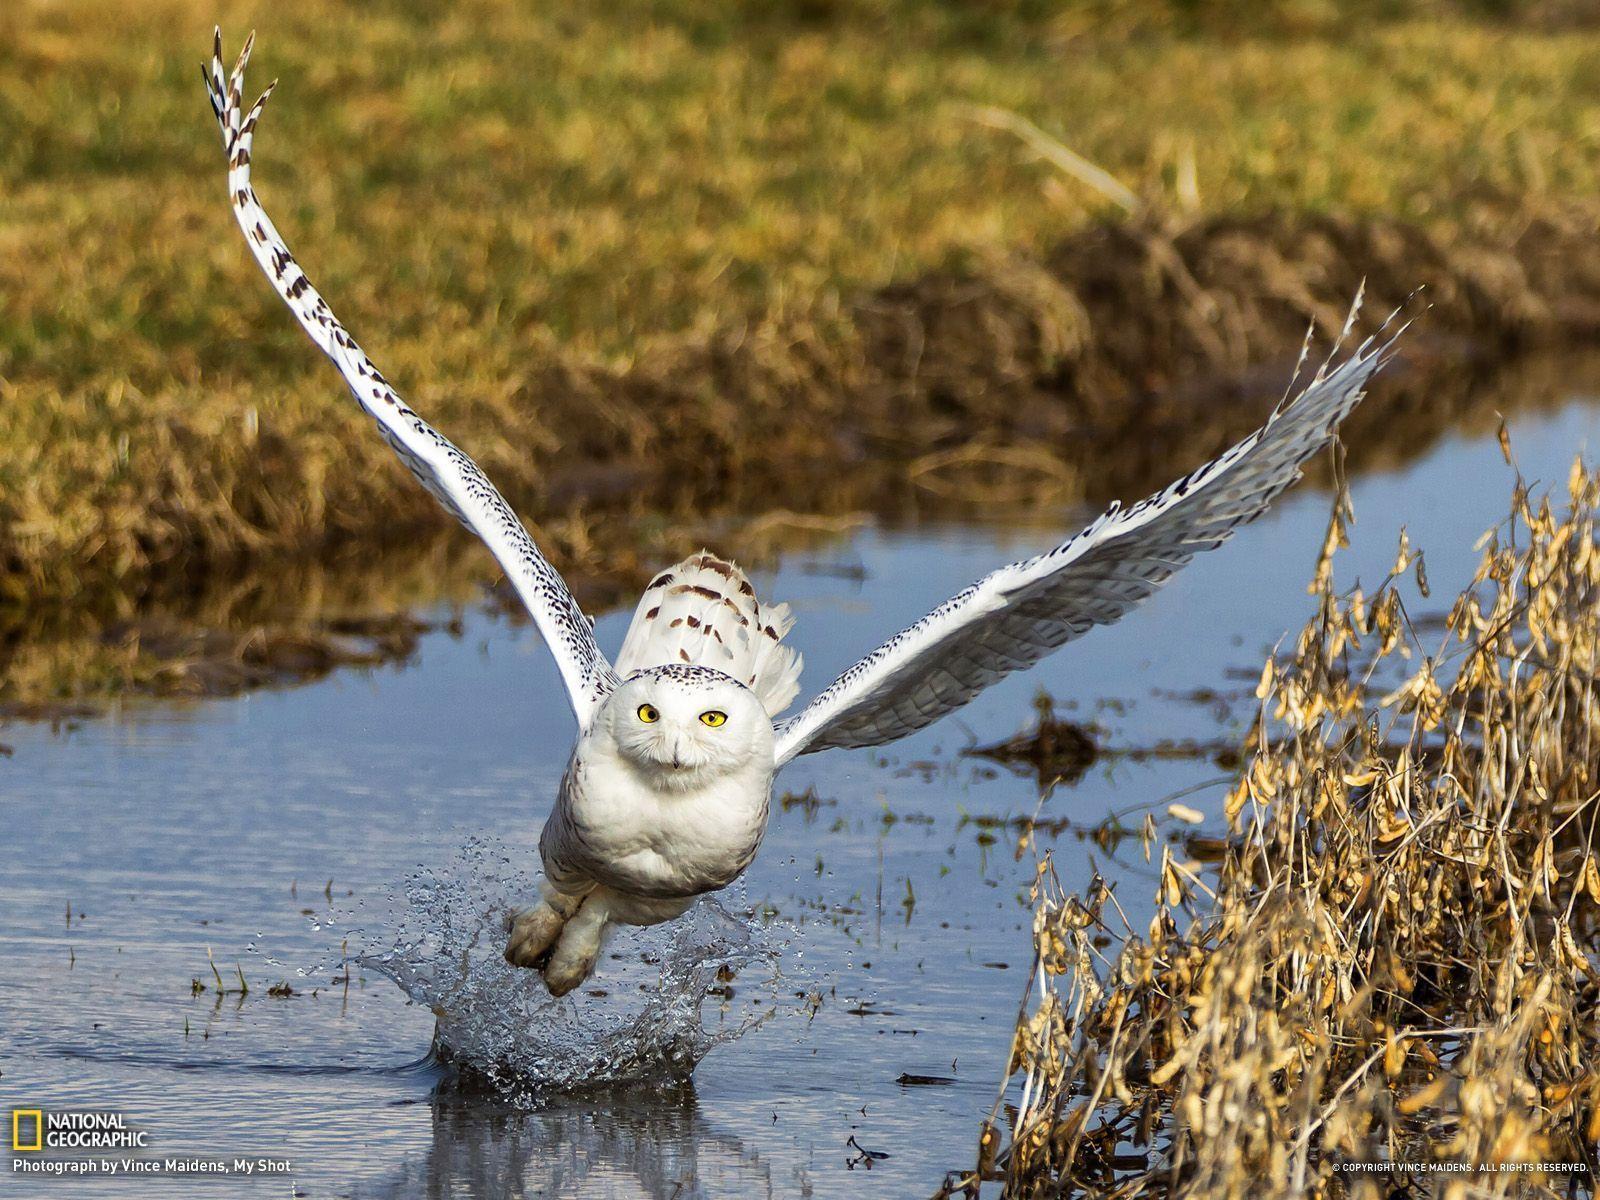 Snowy Owl Picture - Animal Wallpaper - National Geographic Photo